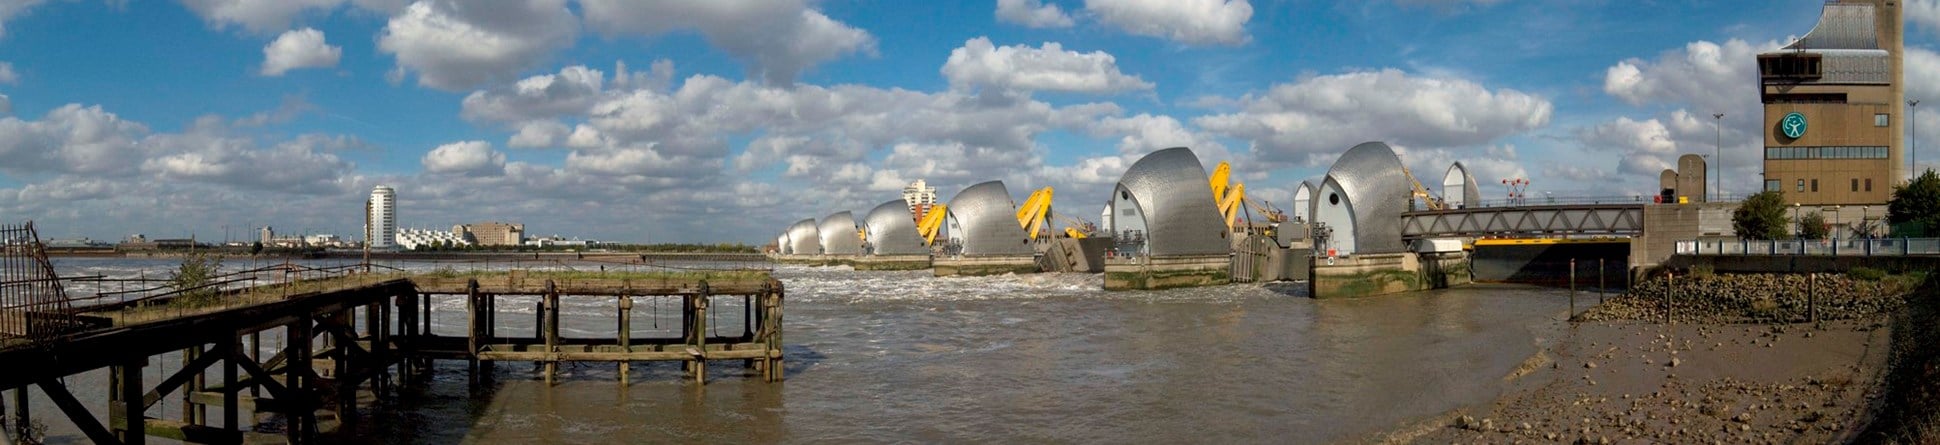 A wide angled photograph of a jetty and rocky foreshore in front of the Thames Barrier, London.